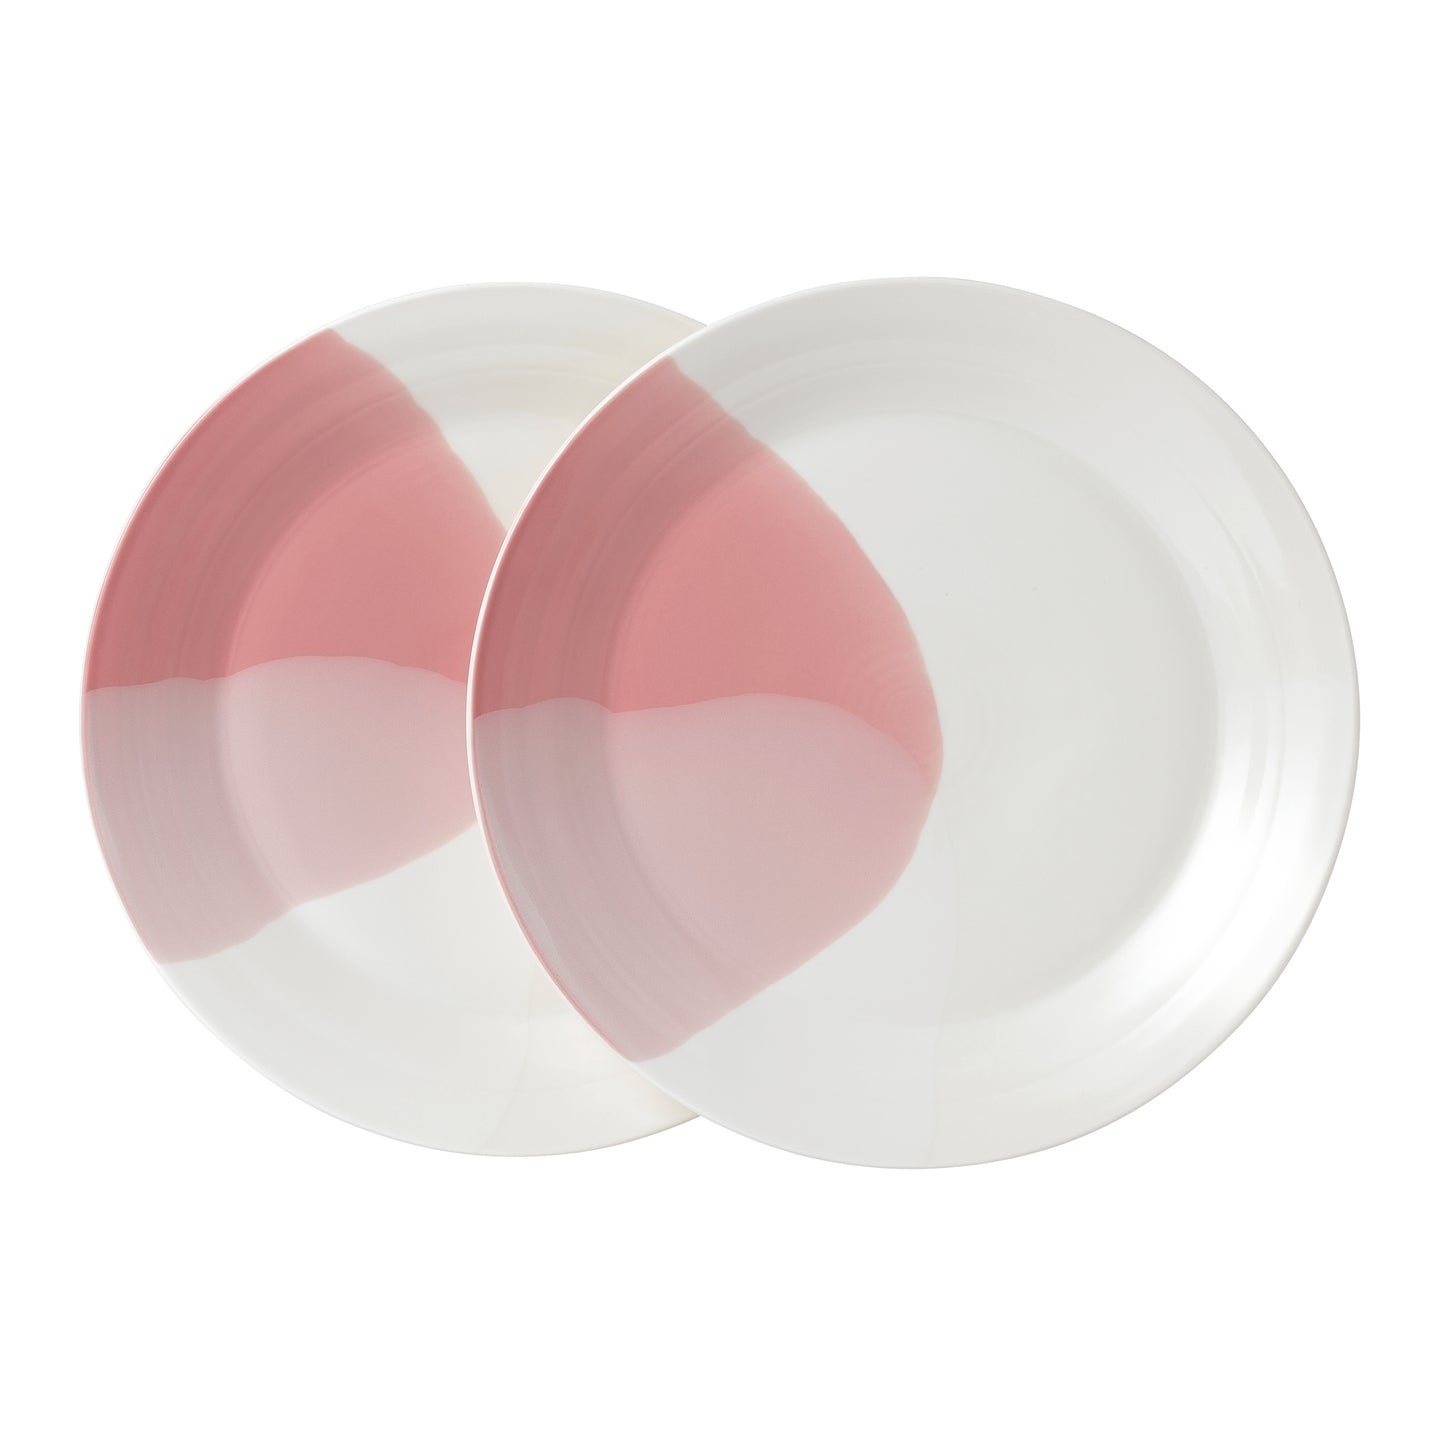 Royal Doulton Signature 1815 Coral Dinner Plate (Set of 2)